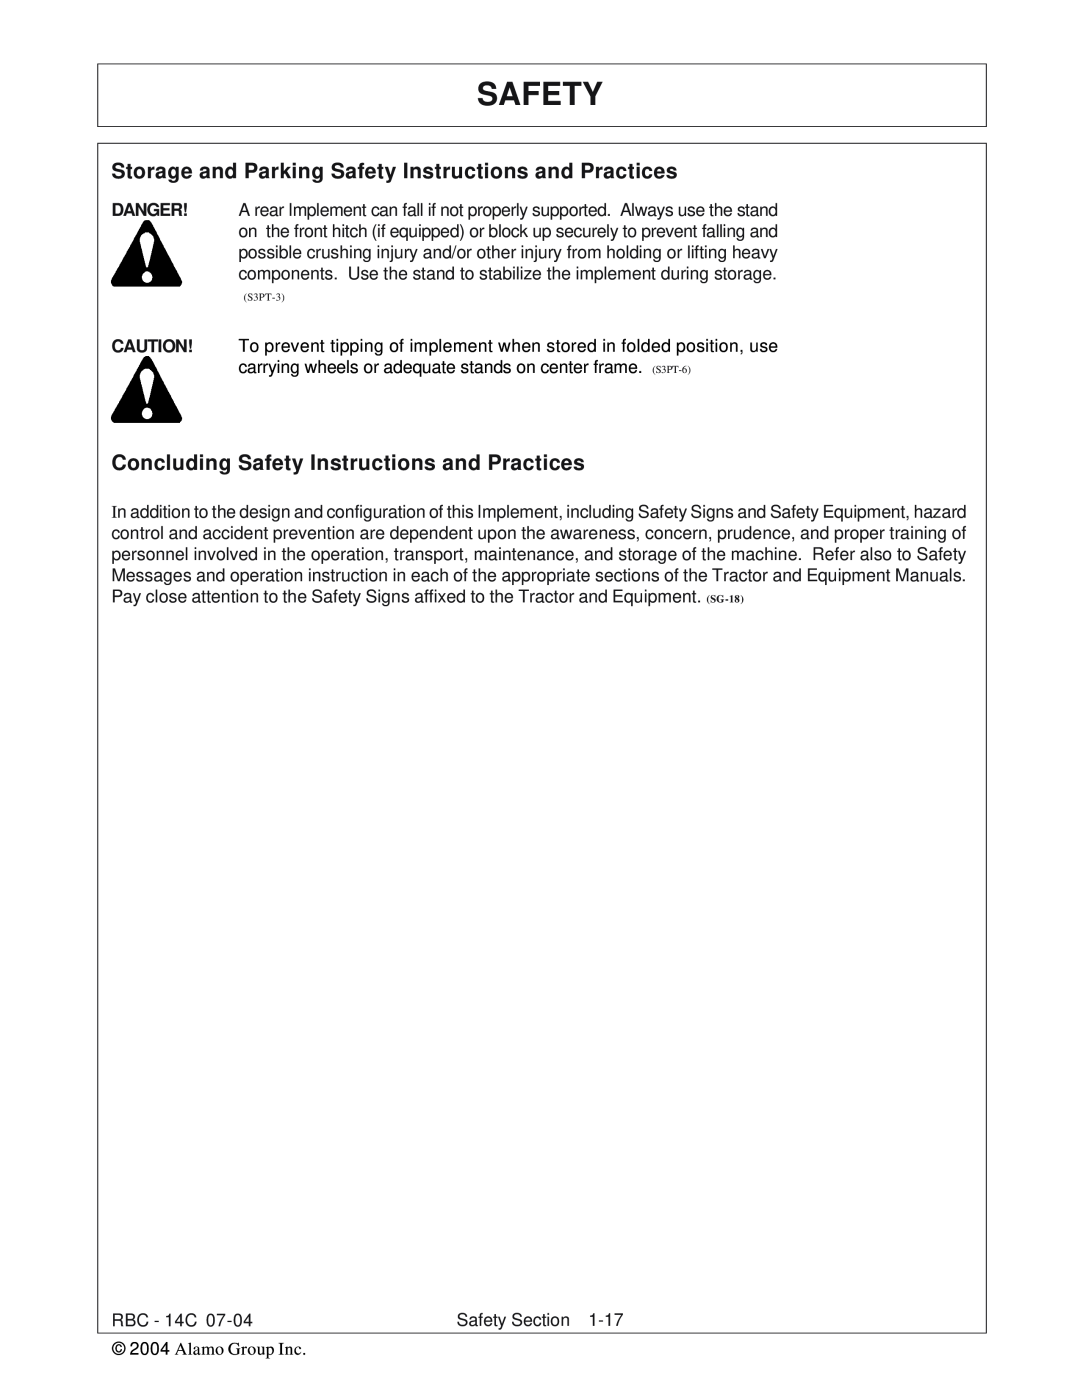 Tiger RBF-14C manual Concluding Safety Instructions and Practices 